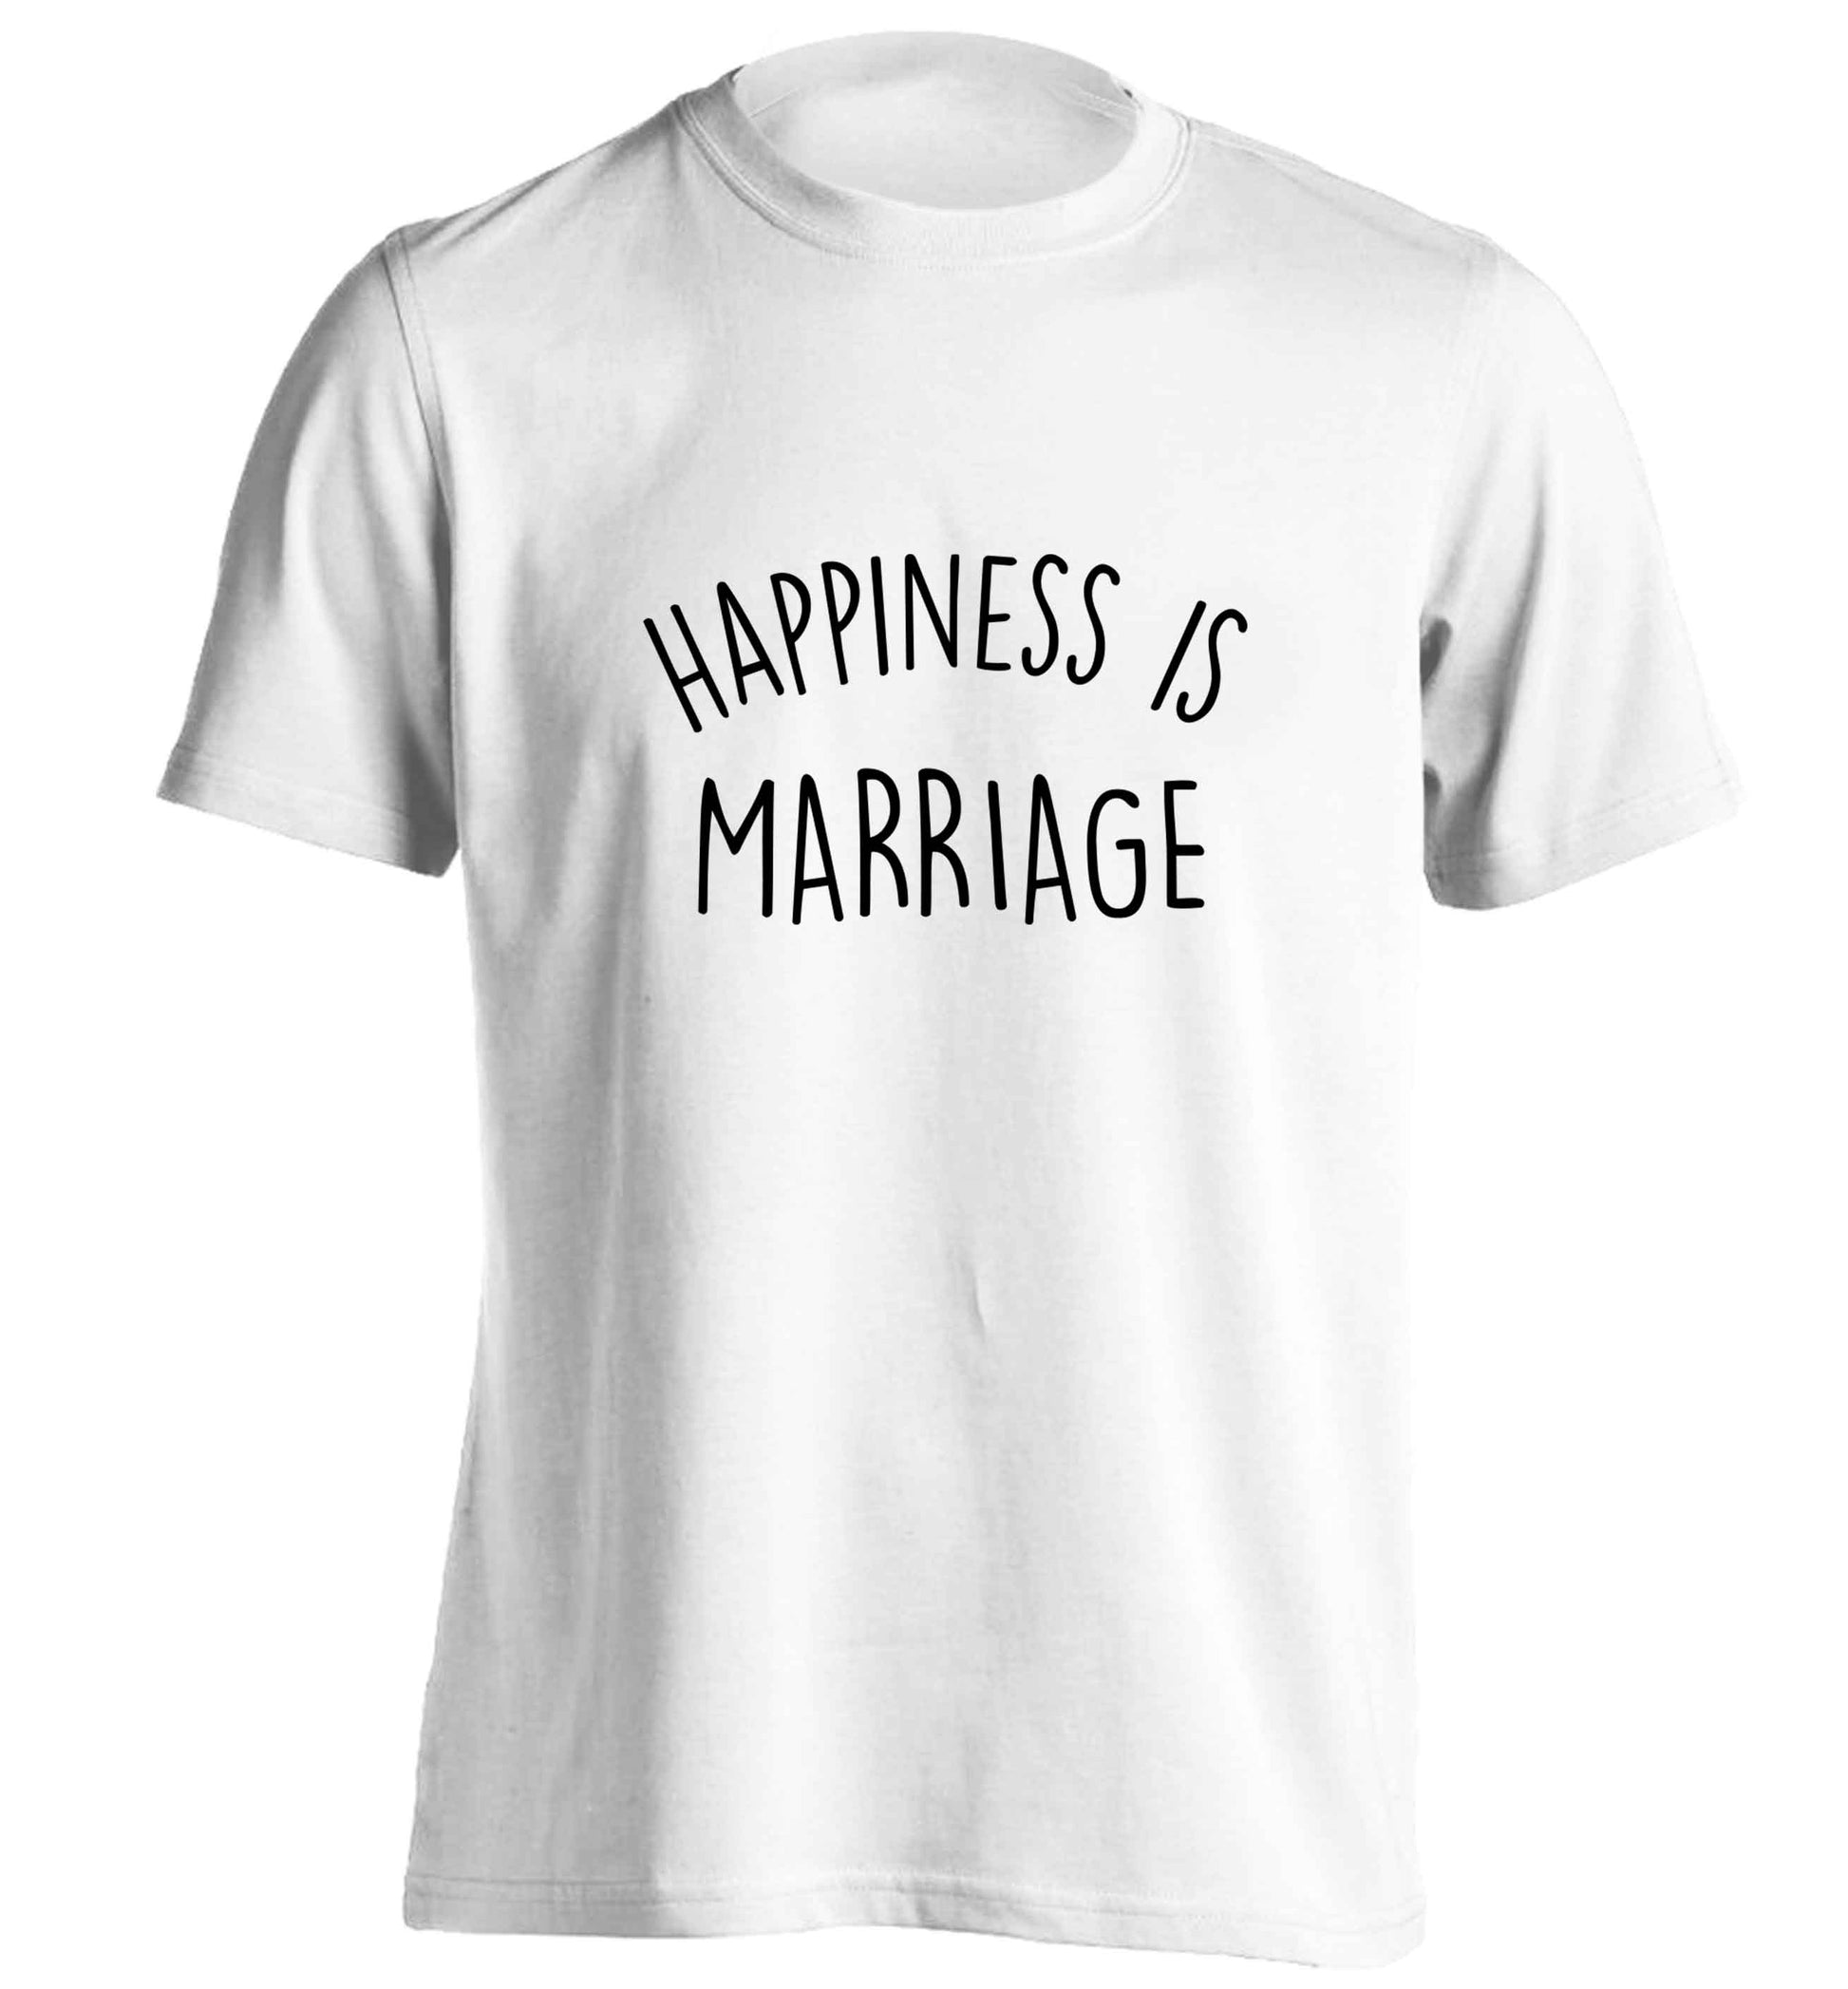 Happiness is marriage adults unisex white Tshirt 2XL